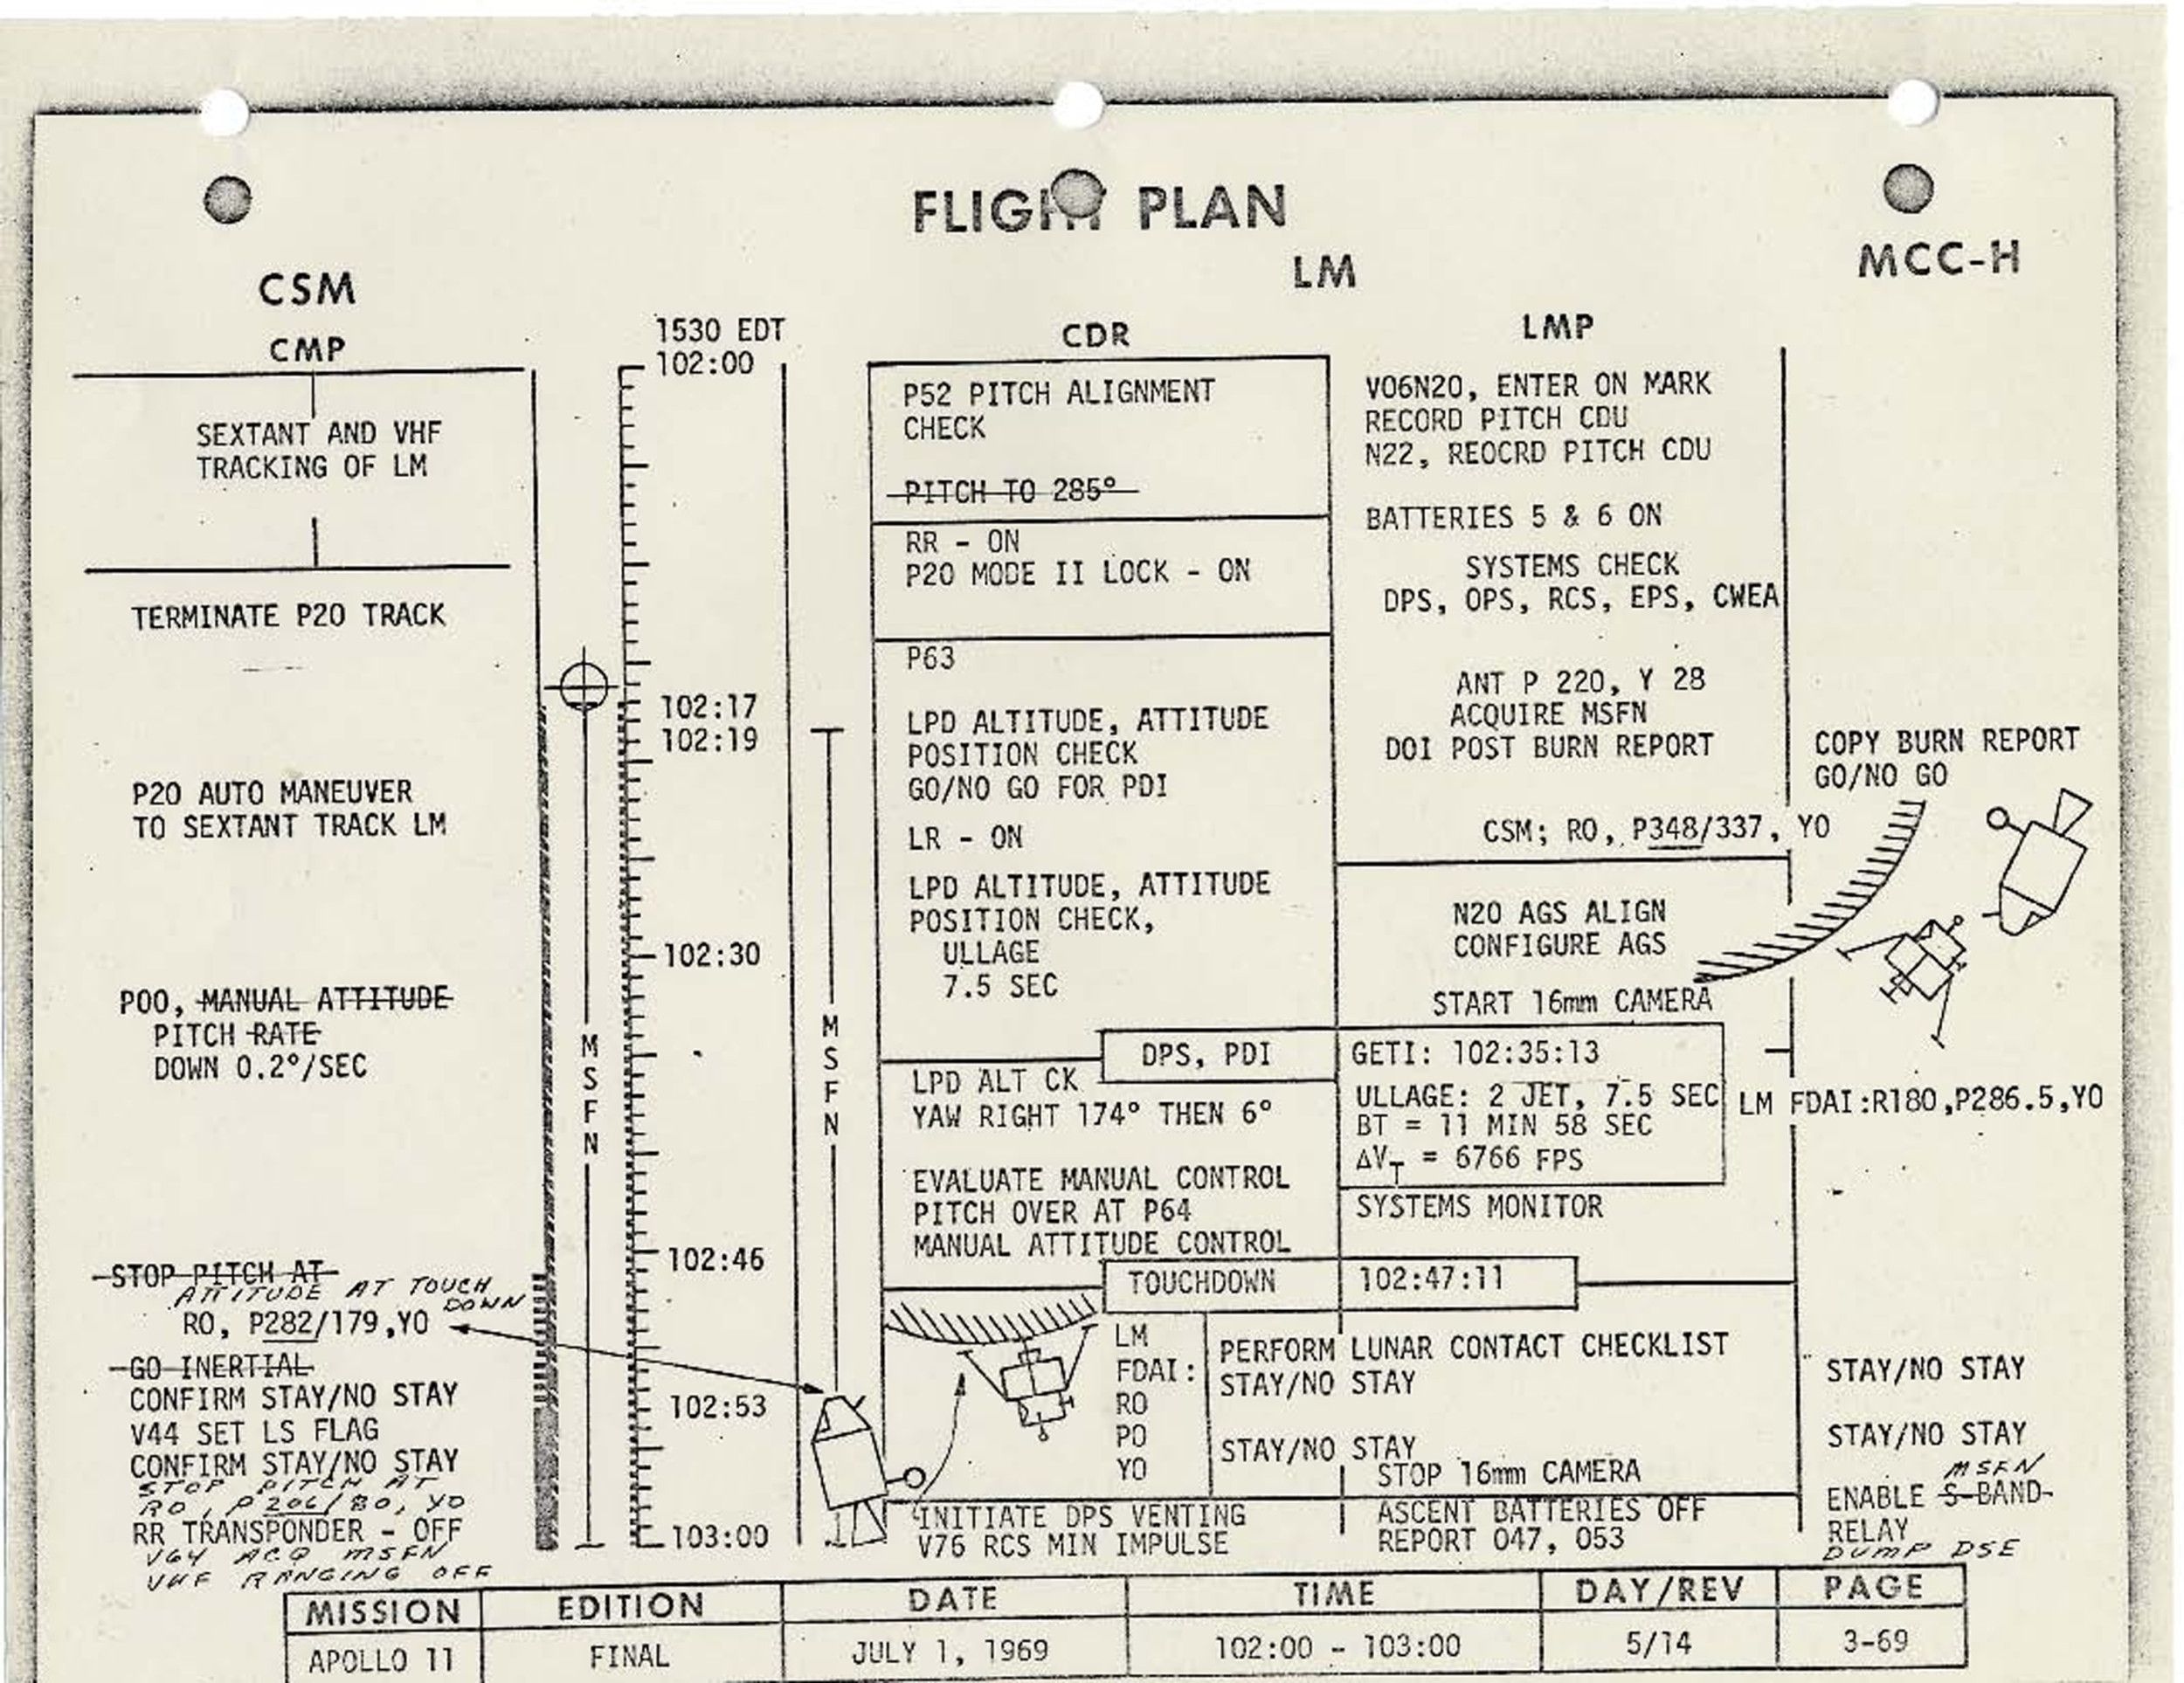 History By Mail - Minute-by-minute flight plan for Apollo 11.